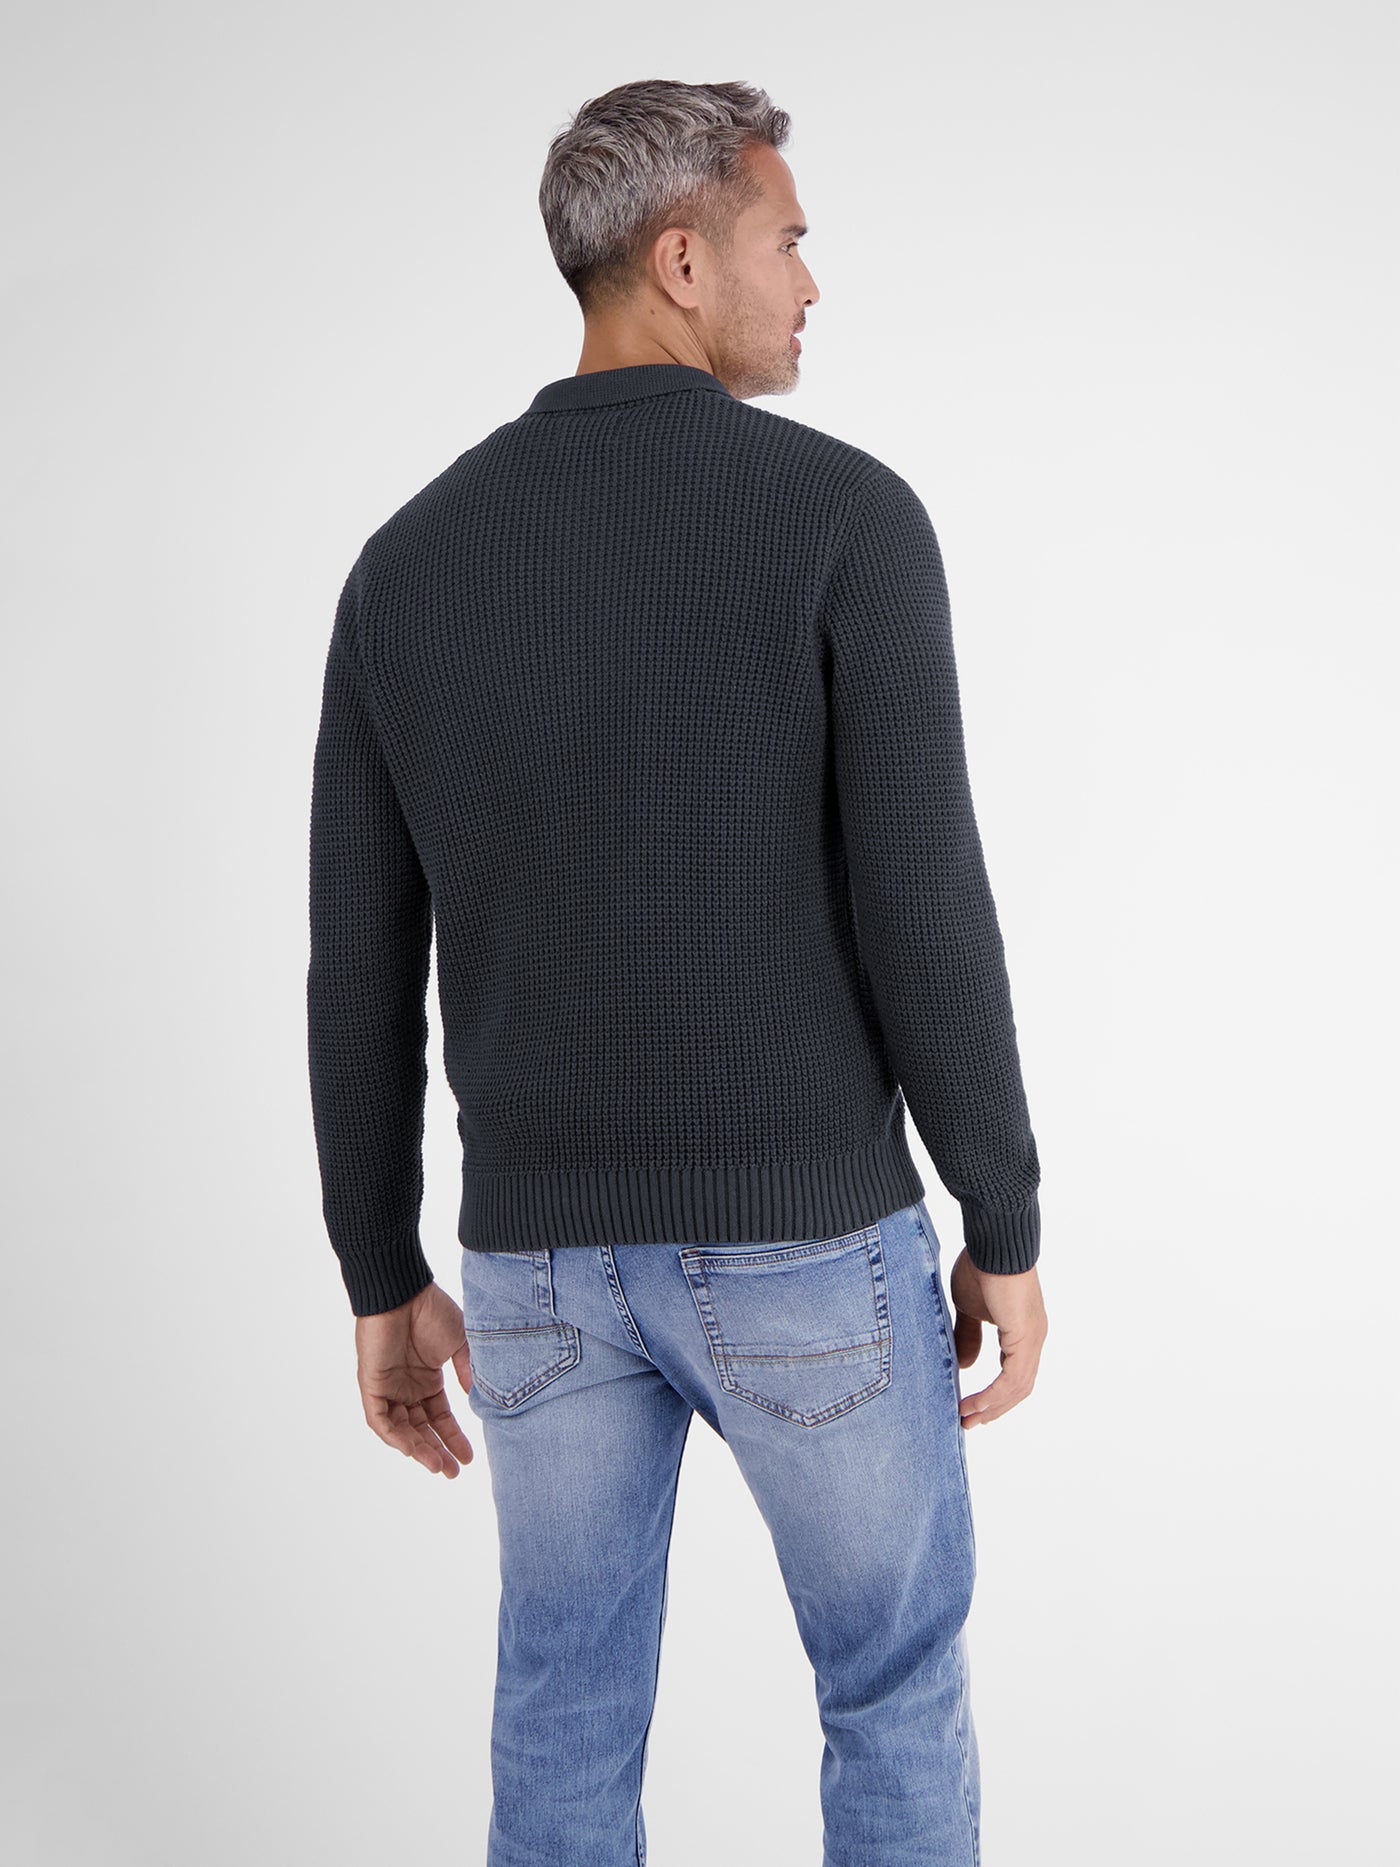 Long sleeve knitted polo